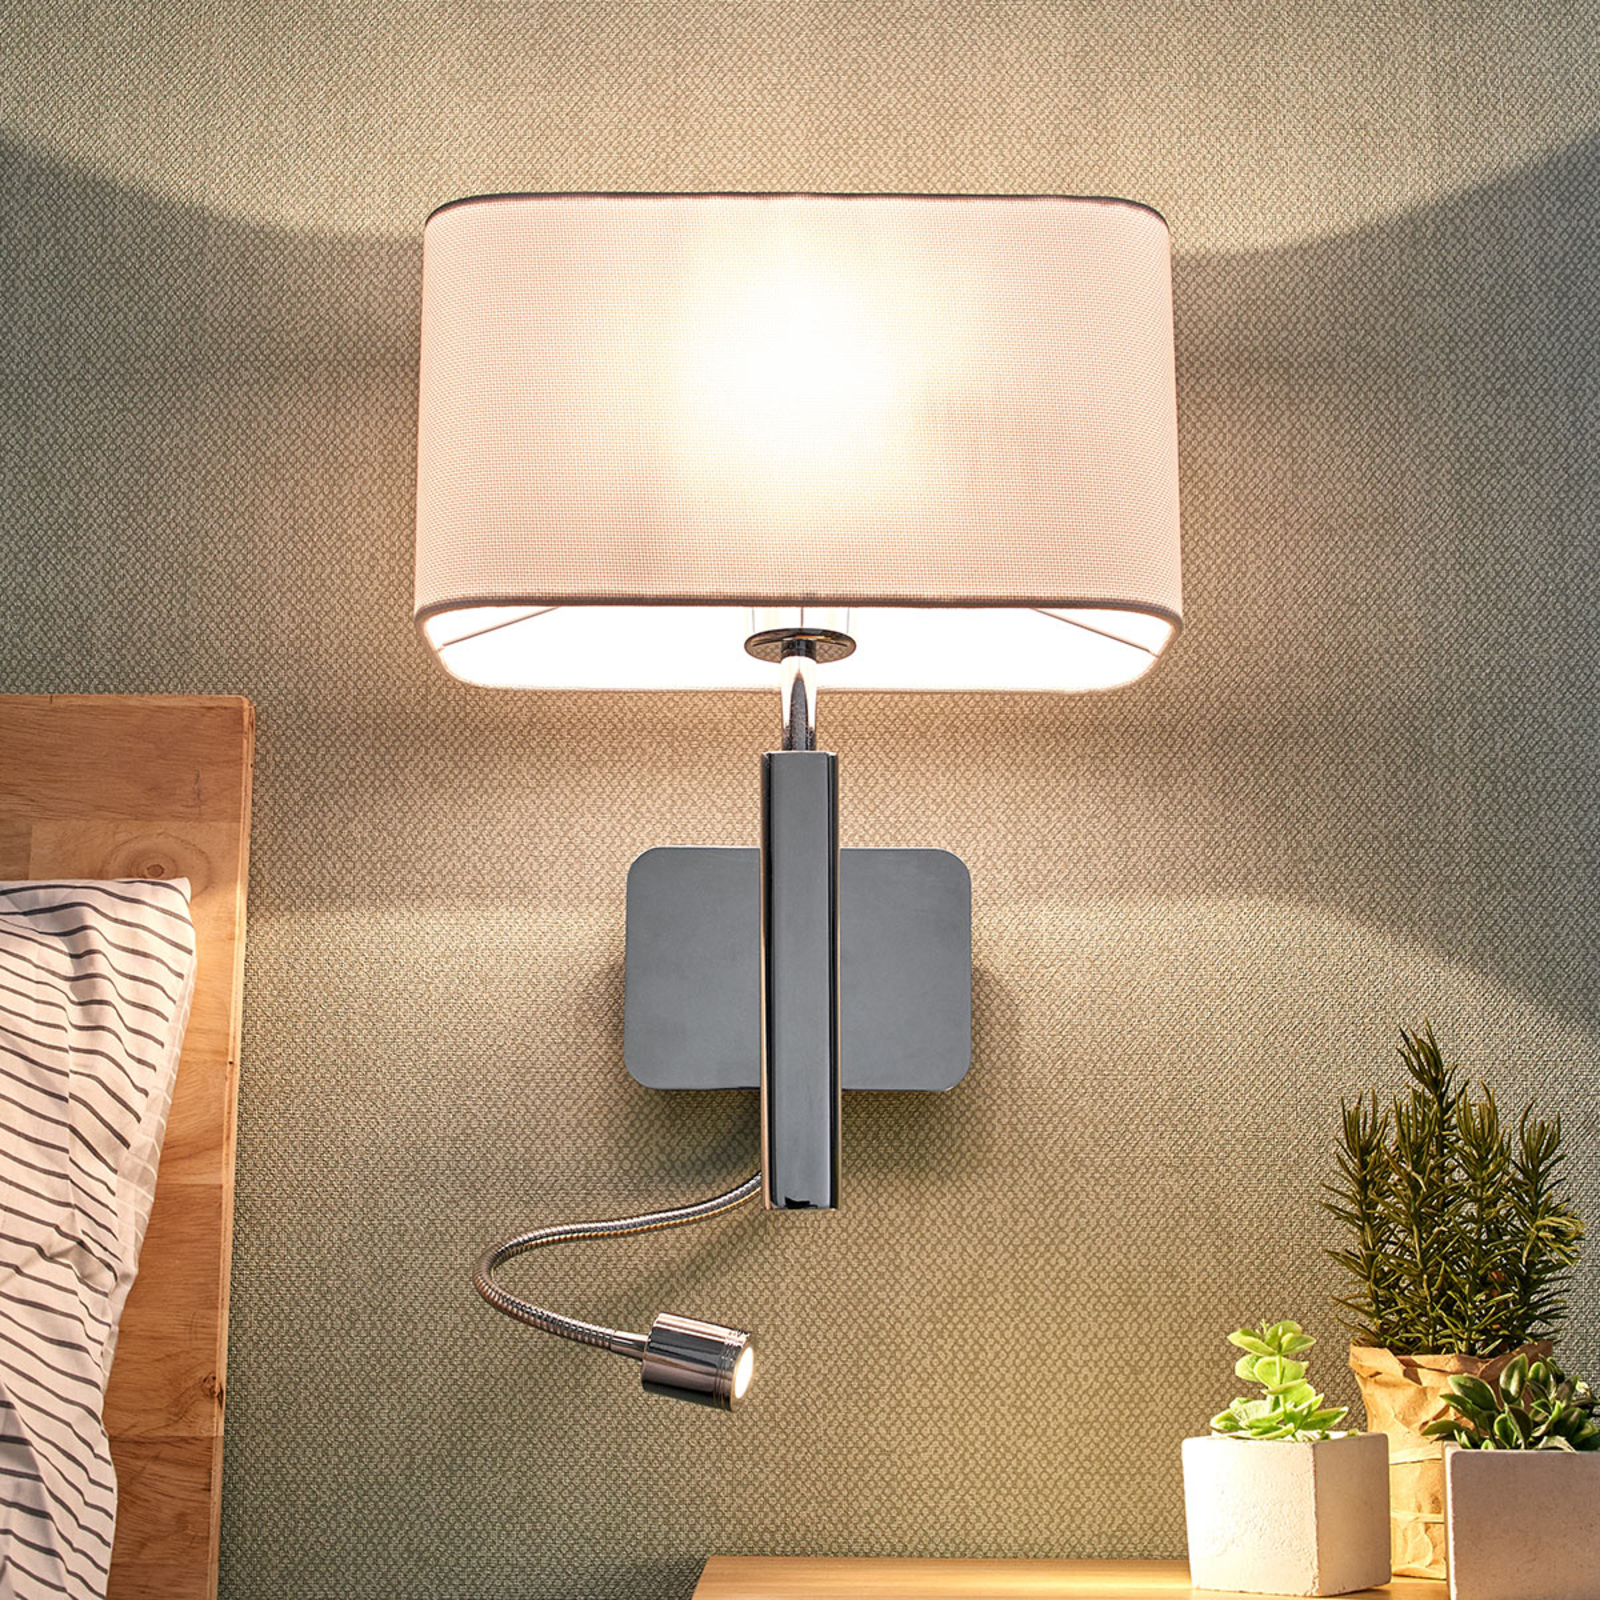 Fabric wall light Jettka with reading arm